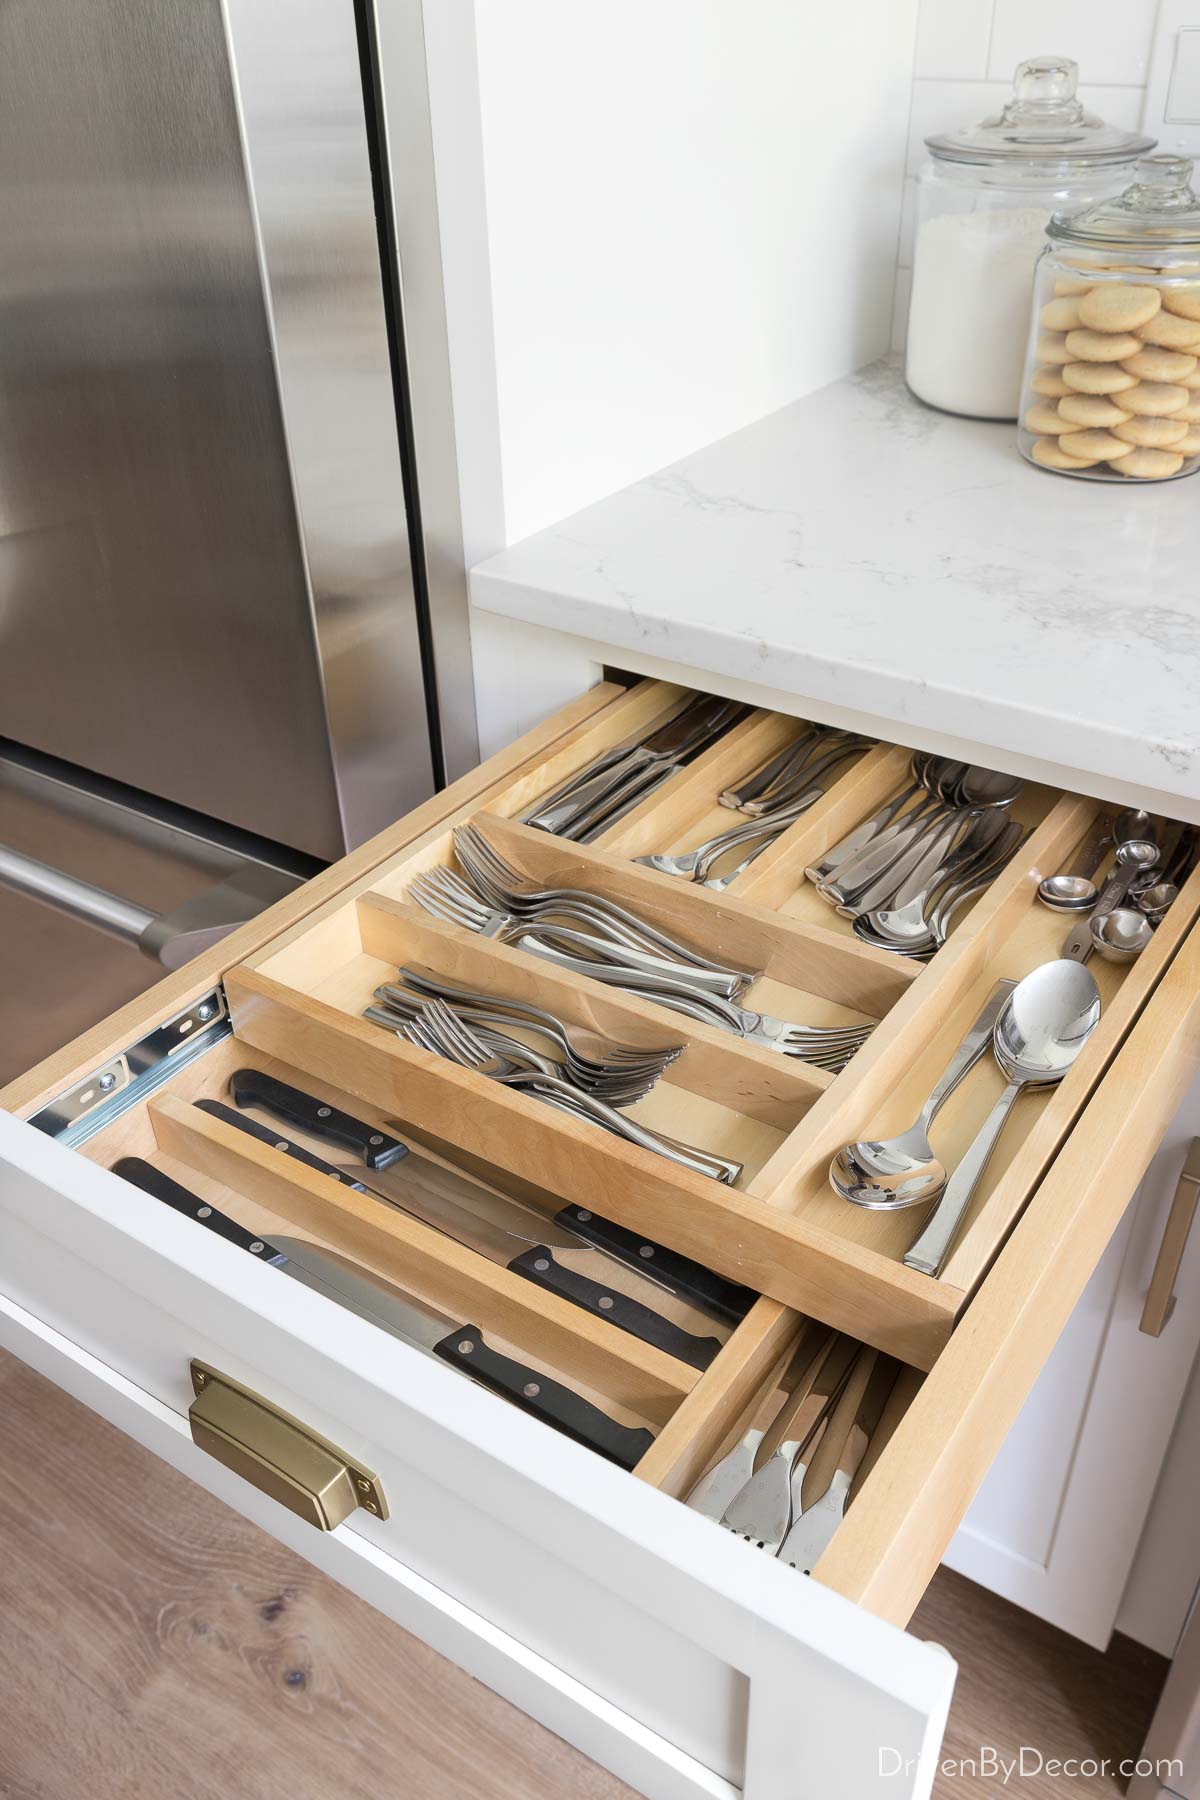 Double tray for silverware in a kitchen drawer